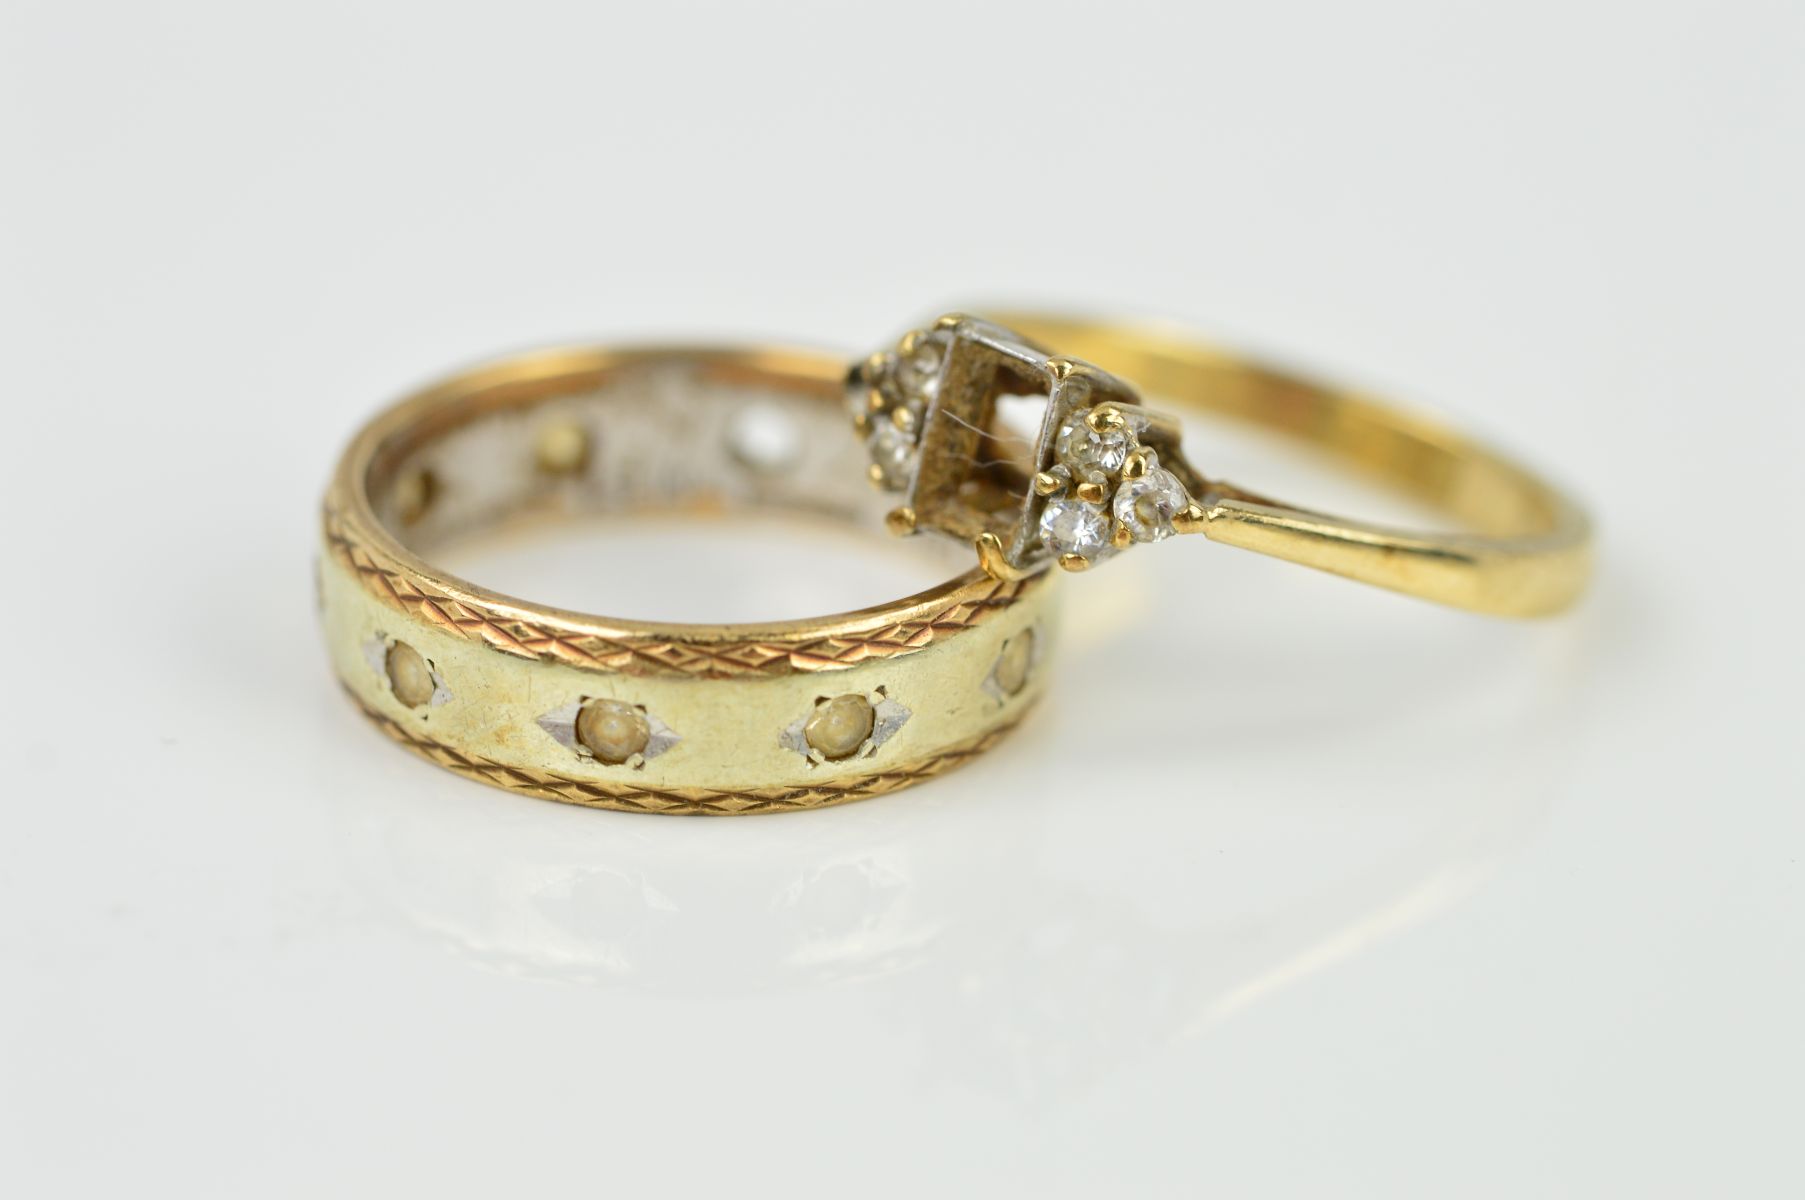 TWO 9CT GOLD RINGS, the first an eternity ring, the central band in a white metal with yellow